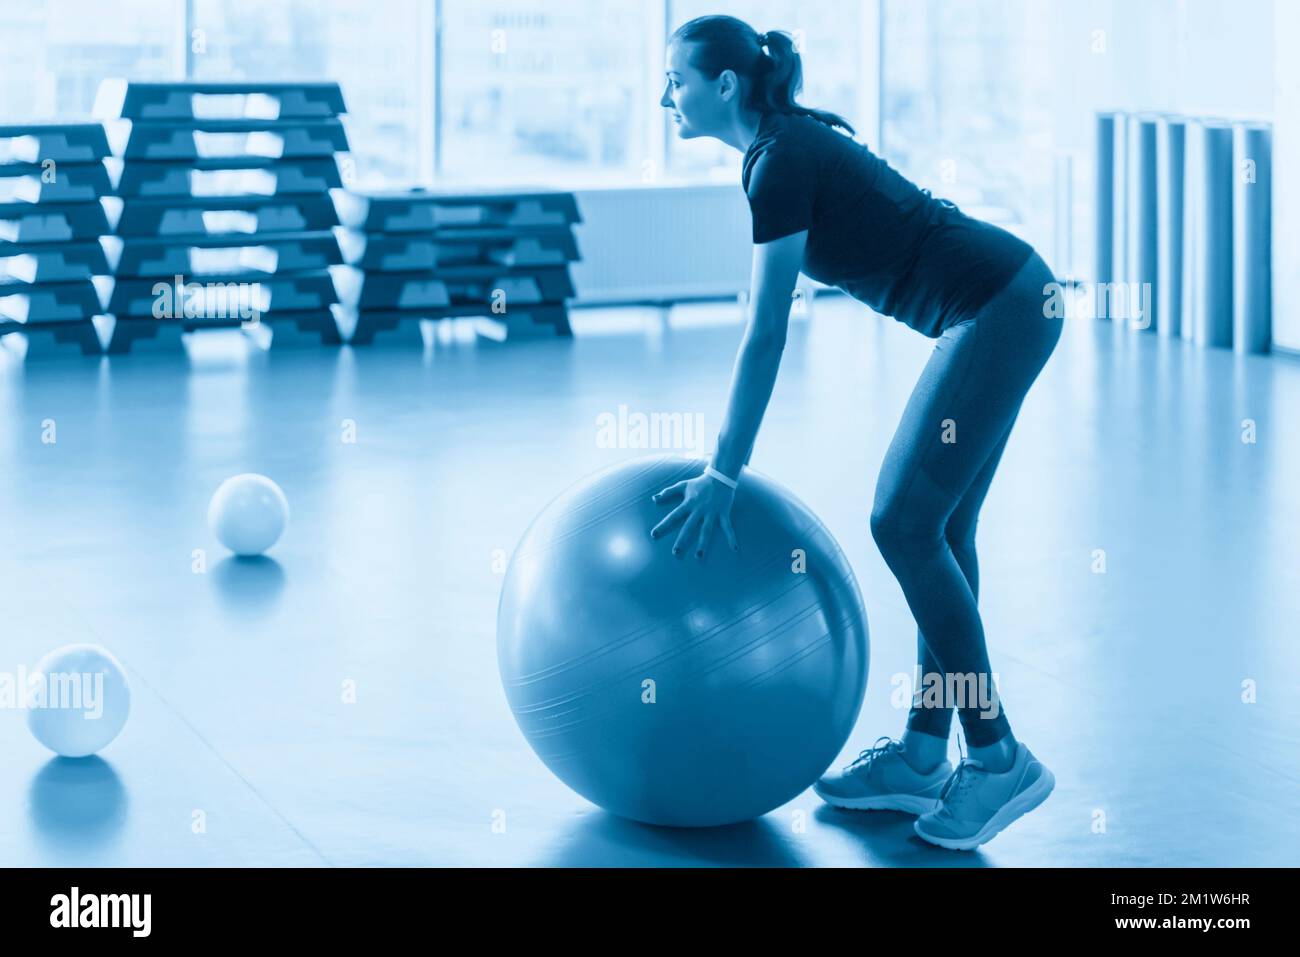 https://c8.alamy.com/comp/2M1W6HR/woman-at-the-gym-doing-exercises-with-pilates-ball-2M1W6HR.jpg